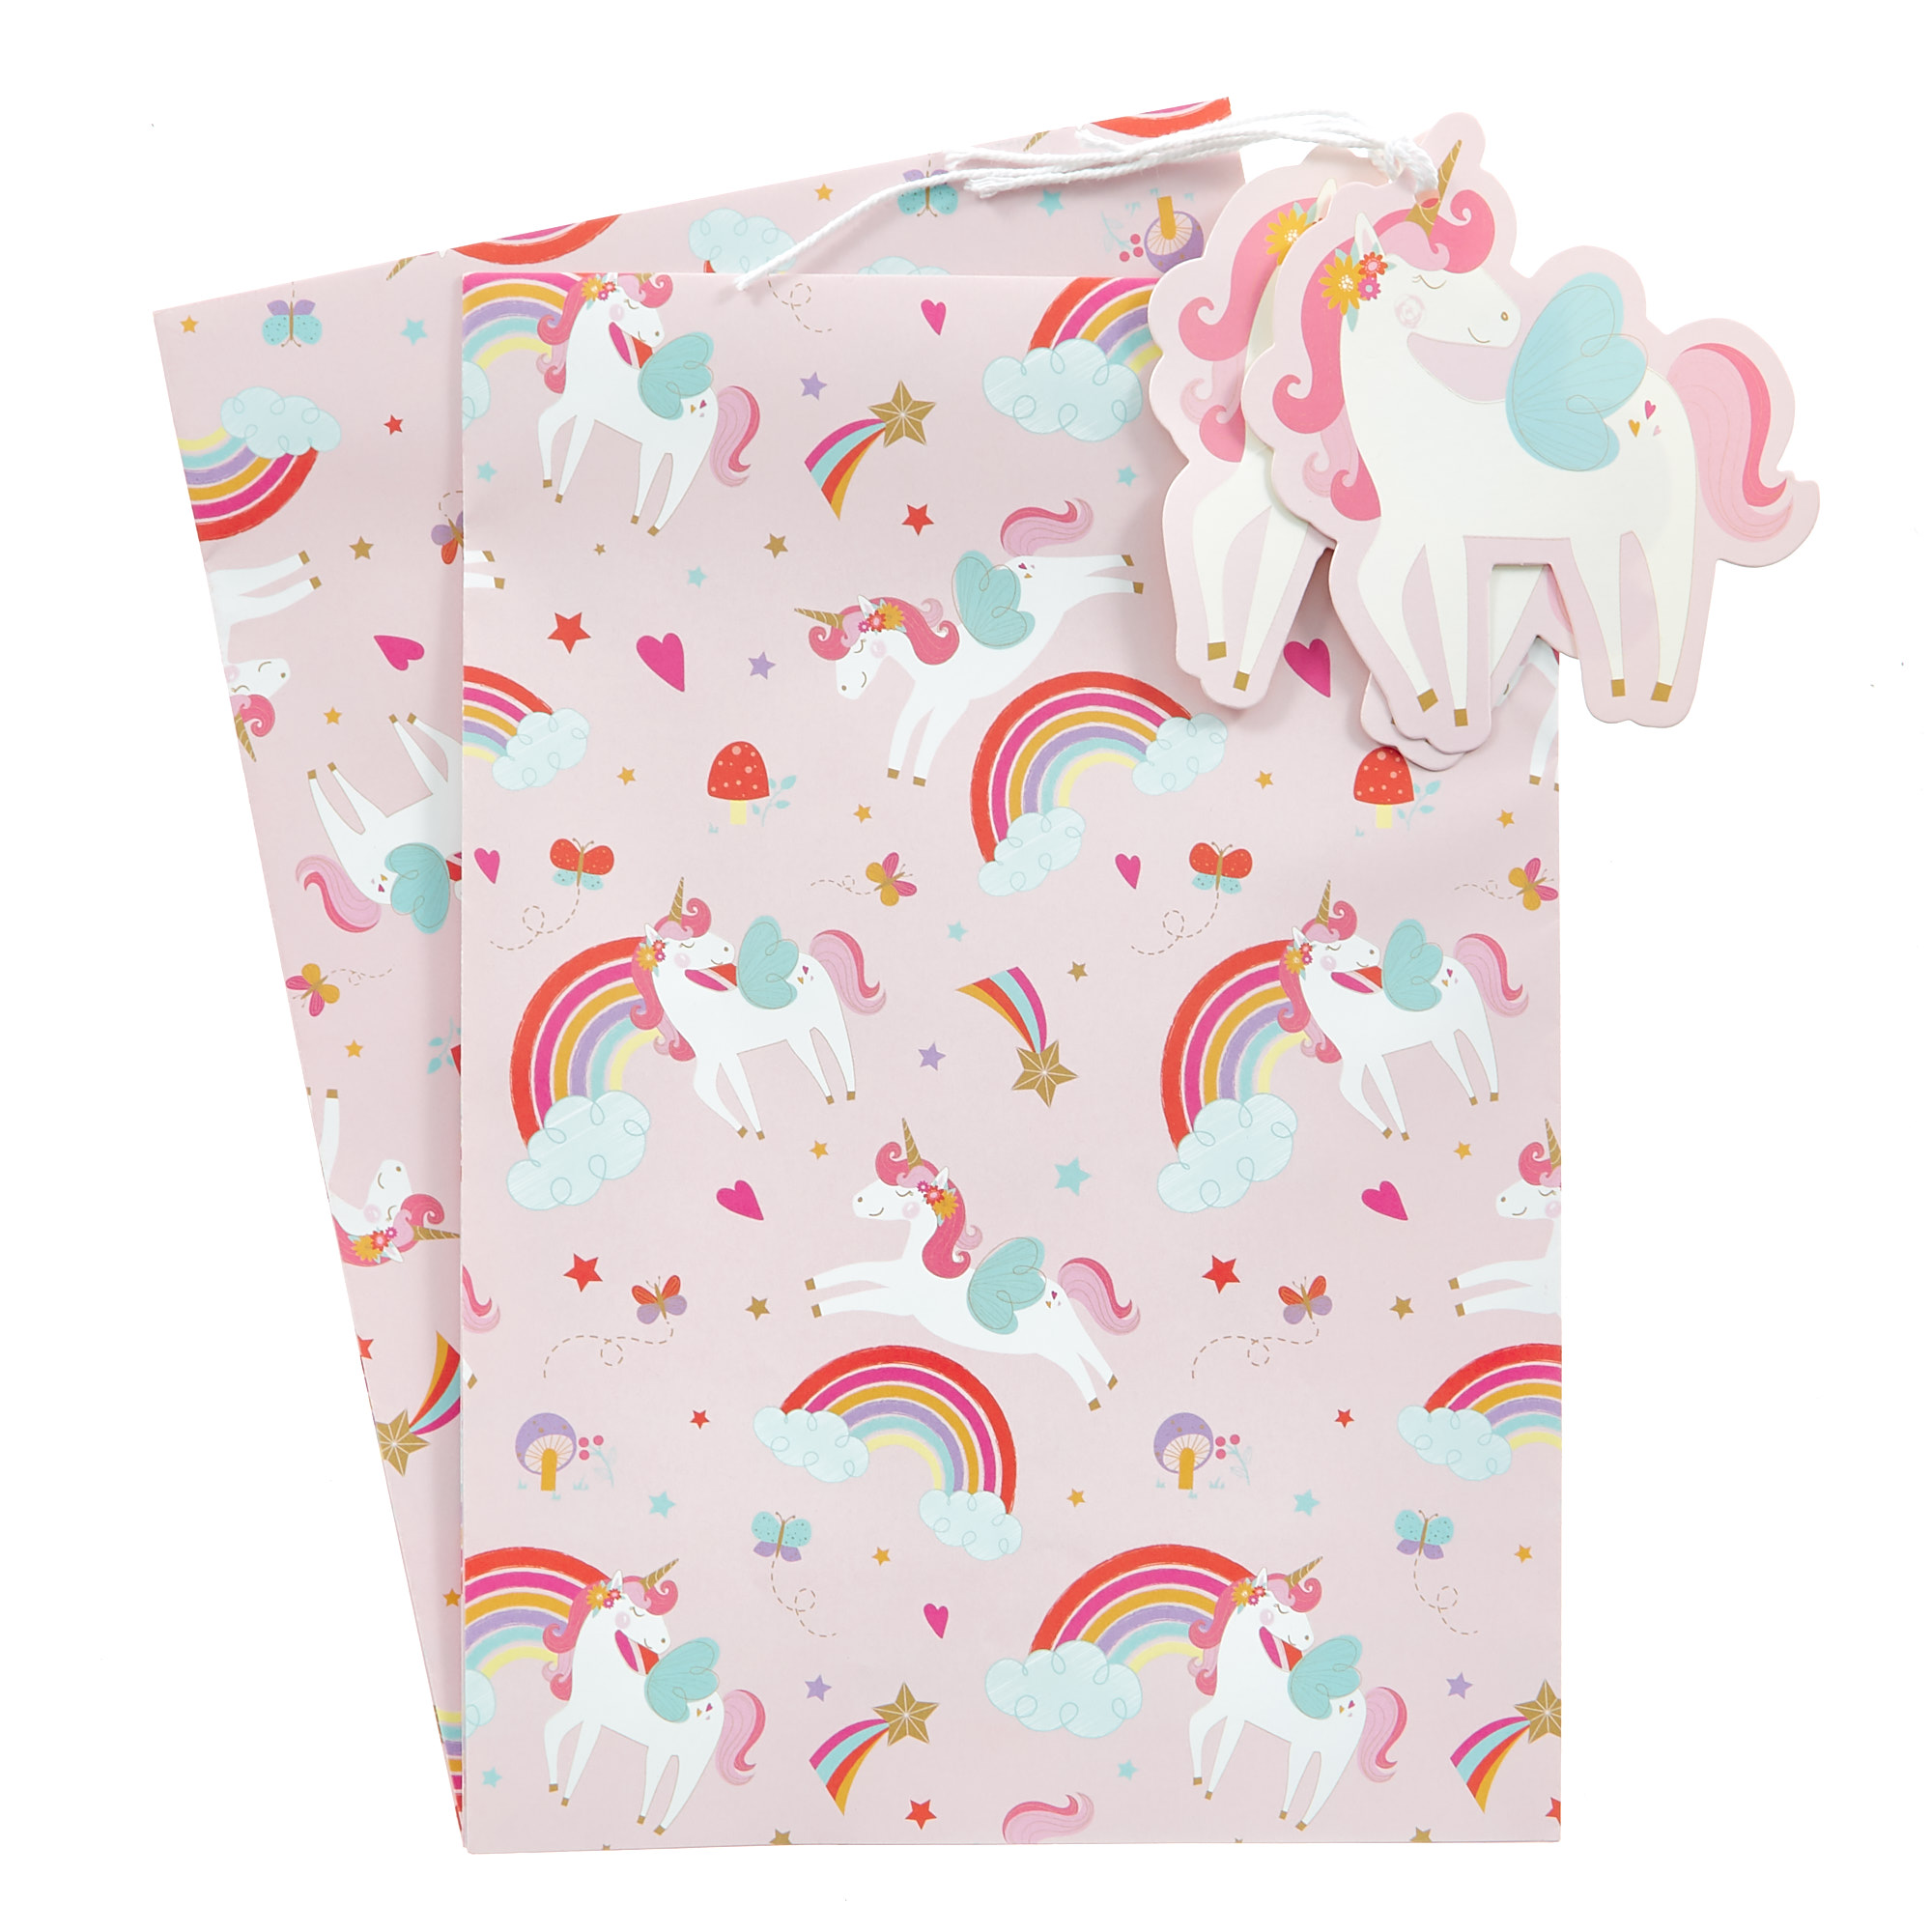 Unicorns & Rainbows Wrapping Paper & Gift Tags - Pack Of 2 